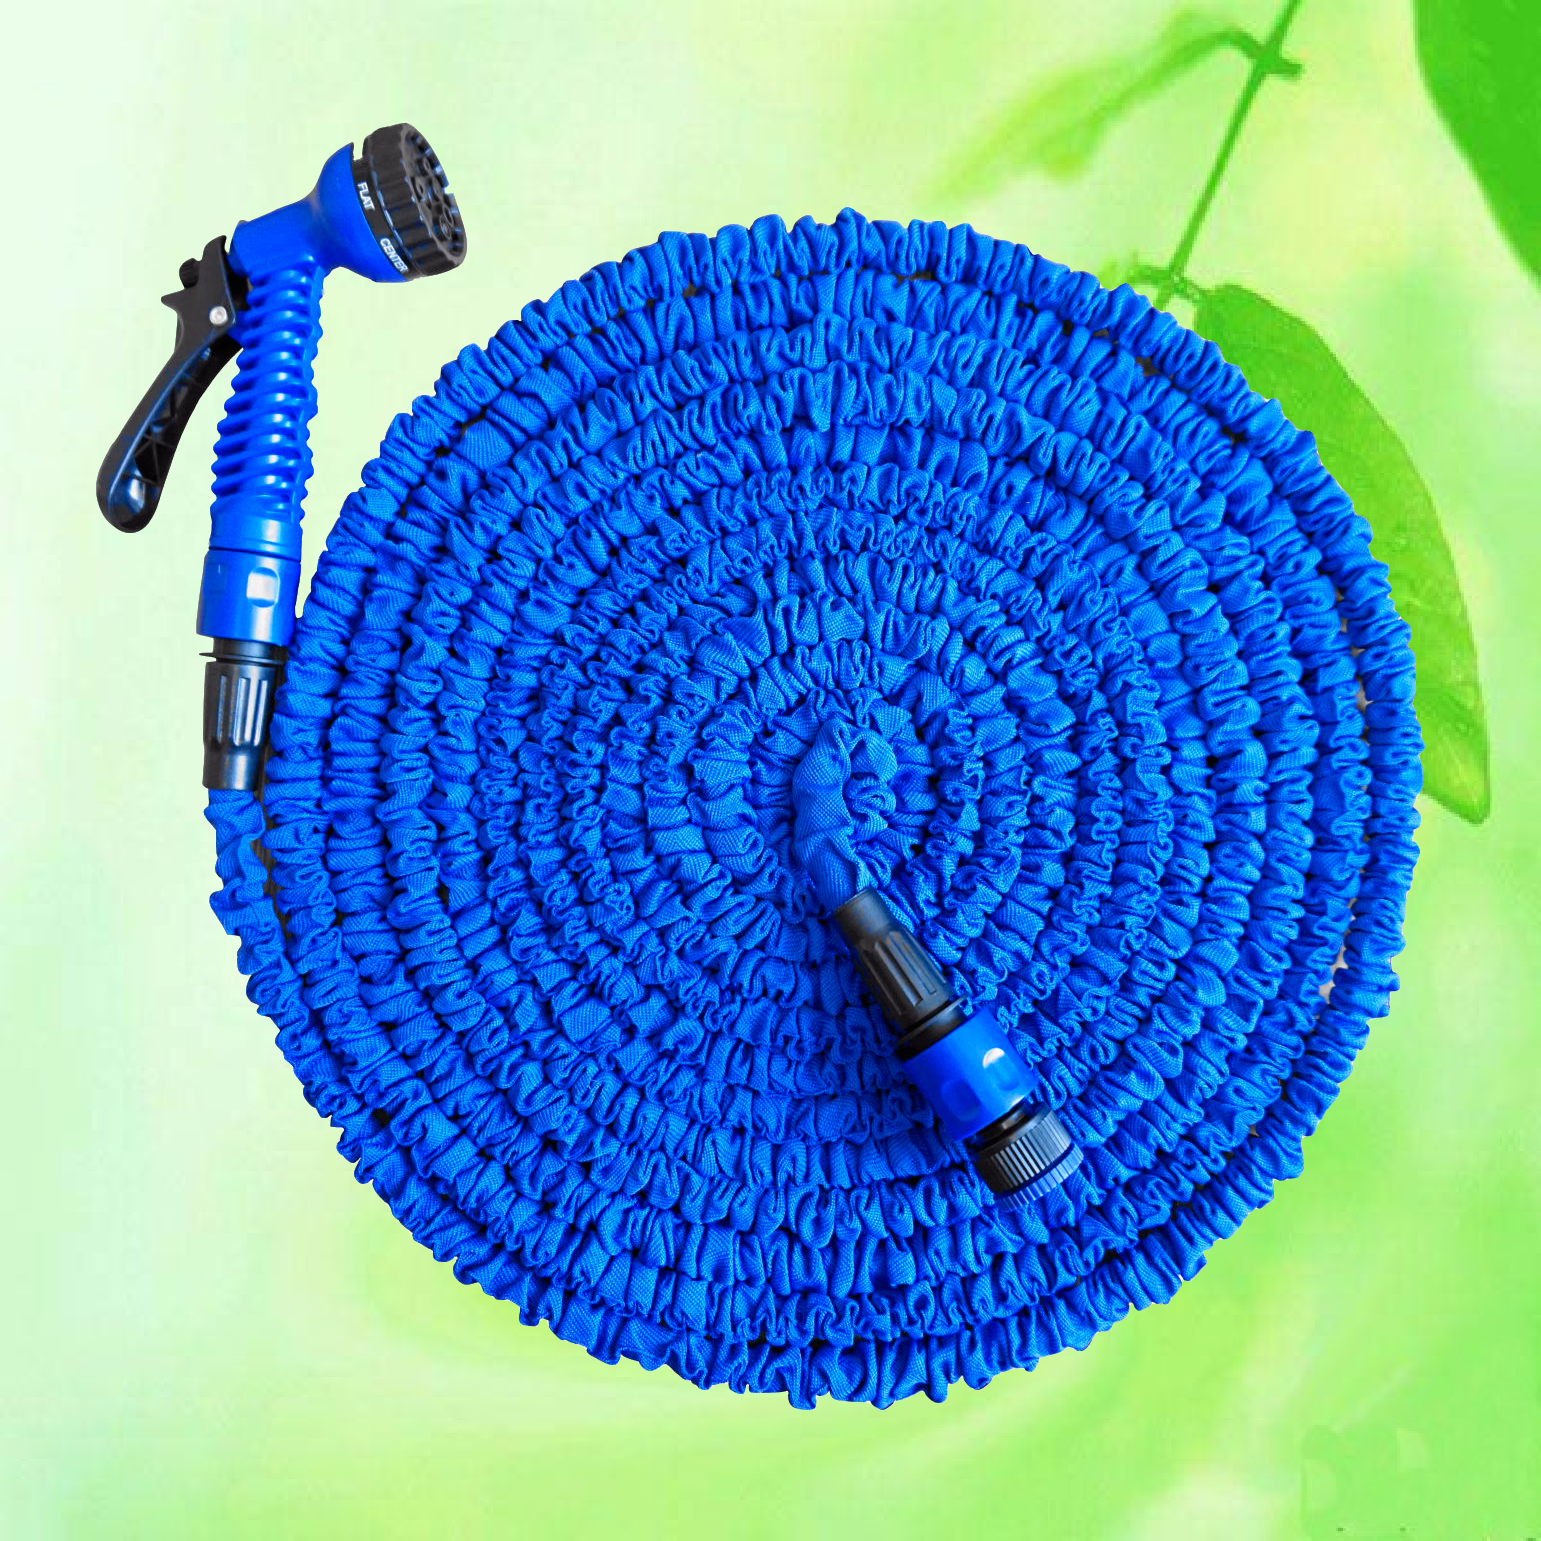 China Quality Latex Expandable Garden Hose Set. Magic elastic Hose with Connectors and Spray Nozzle China supplier manufacturer factory